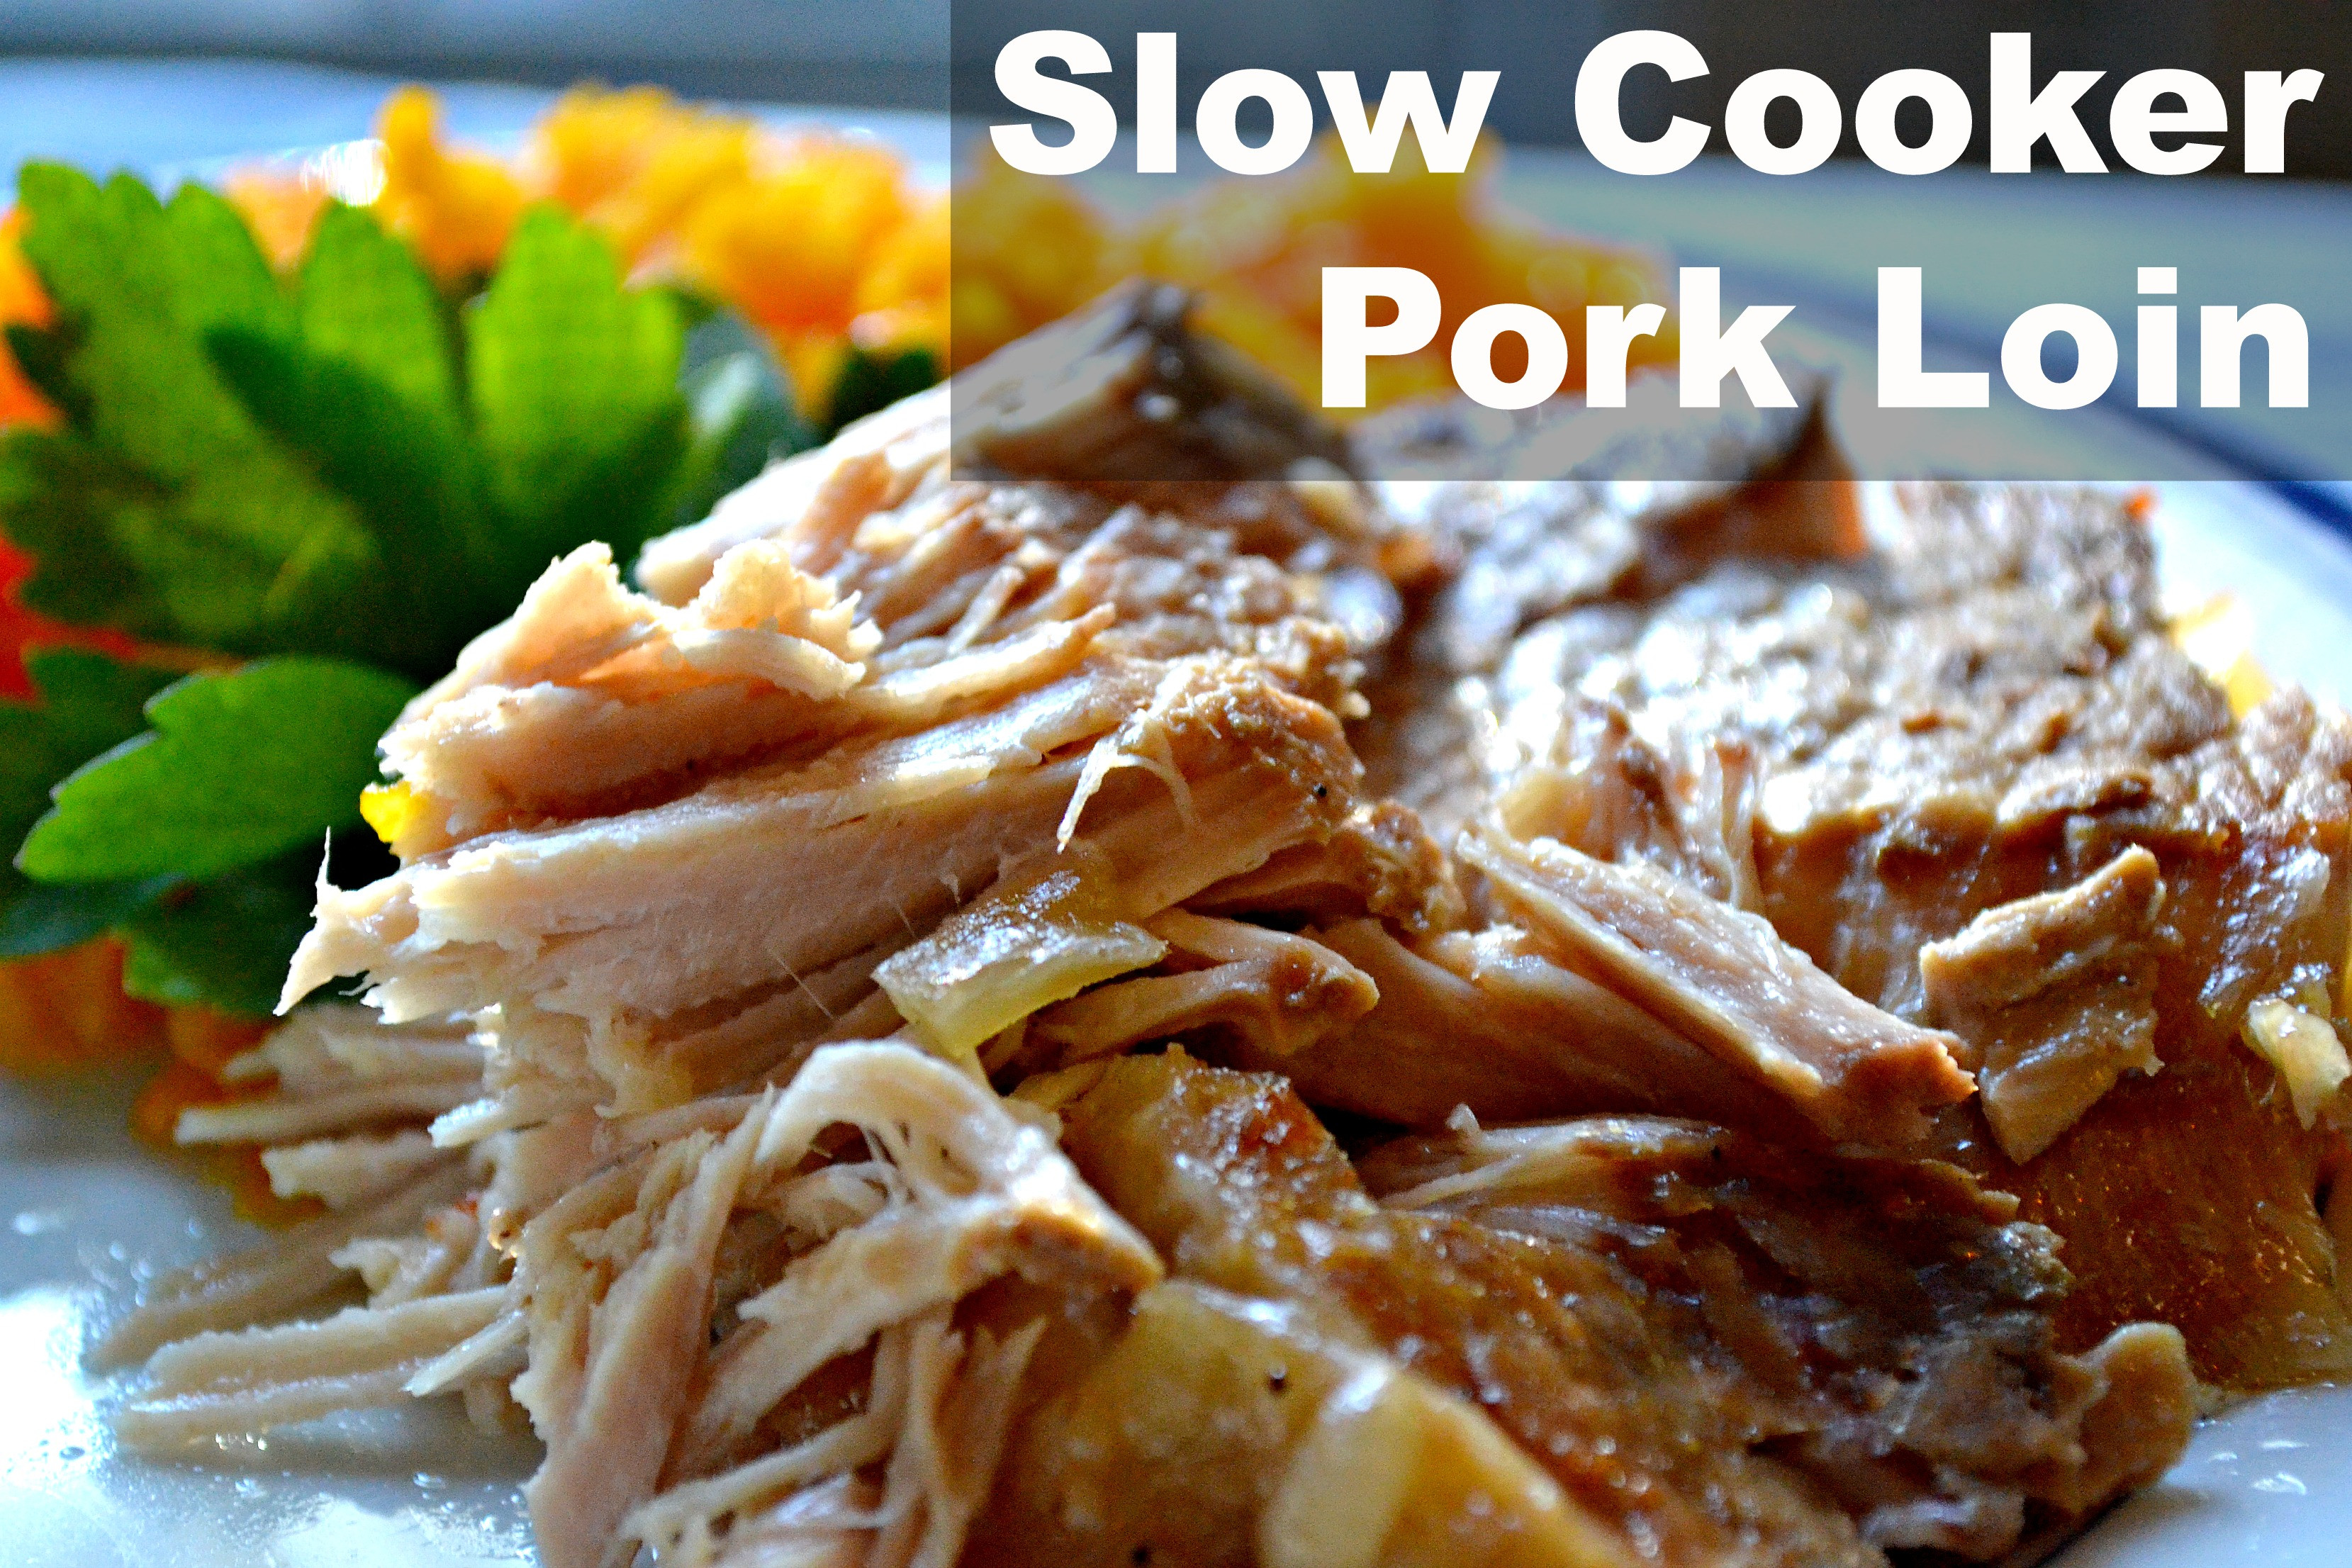 Pork Loin Recipe Slow Cooker
 Two Slow Cooker Pork Loin Recipes Blissfully Domestic